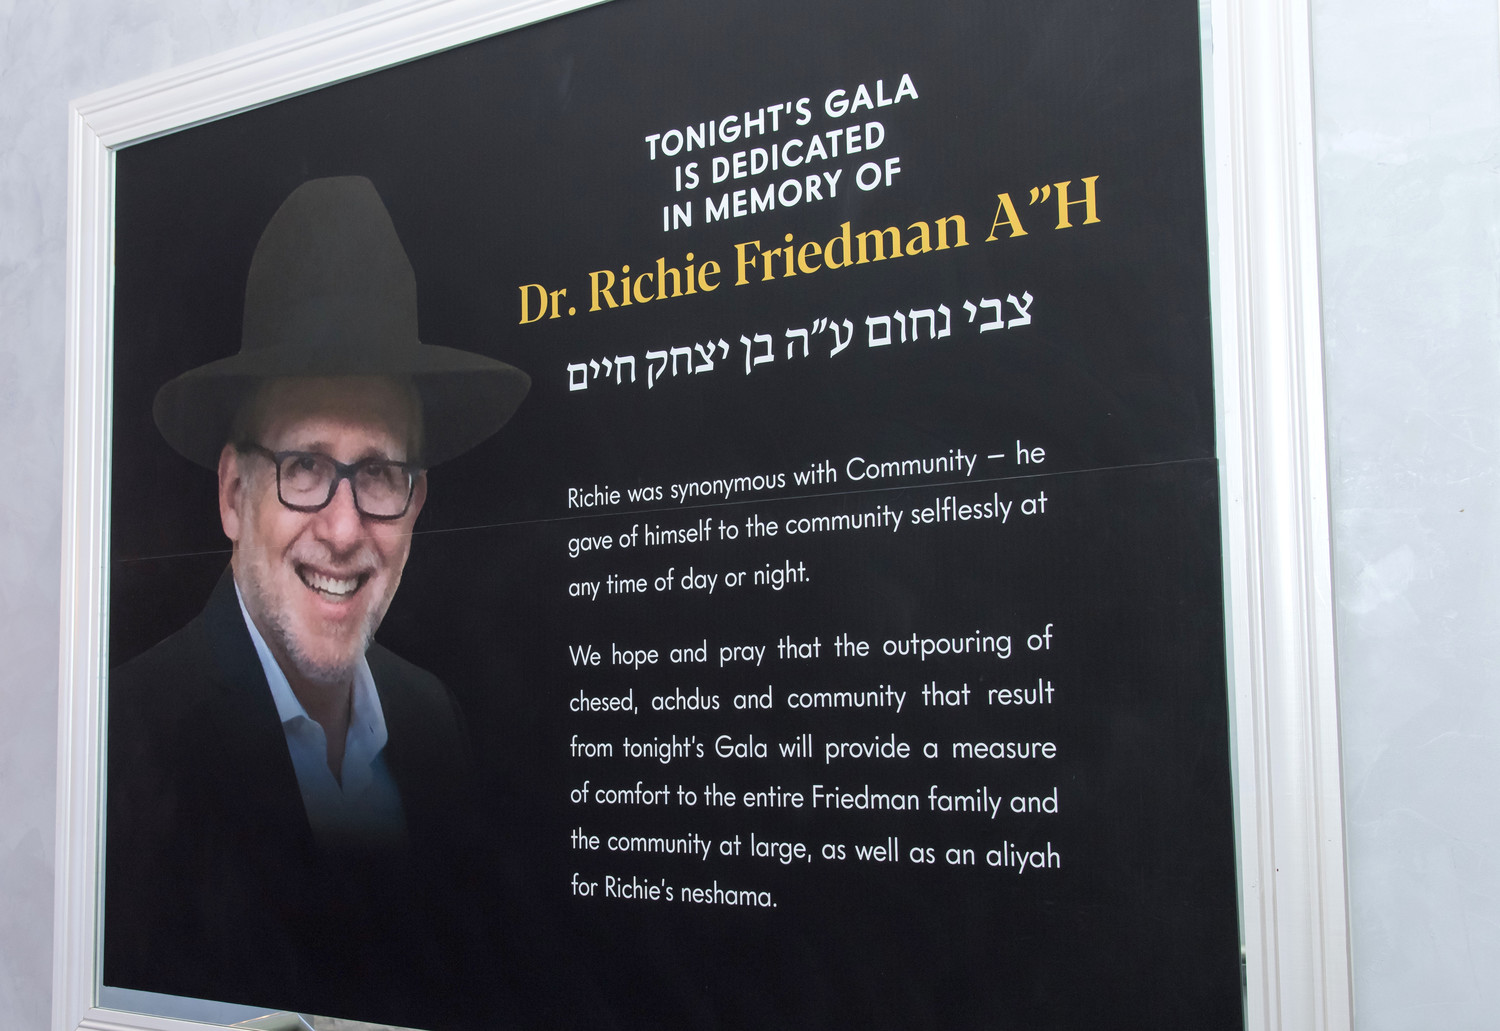 A poster honors Dr. Richie Friedman a”h, the medical director of Chevera Hatzalah in whose memory the Jan. 6 Achiezer gala was dedicated.